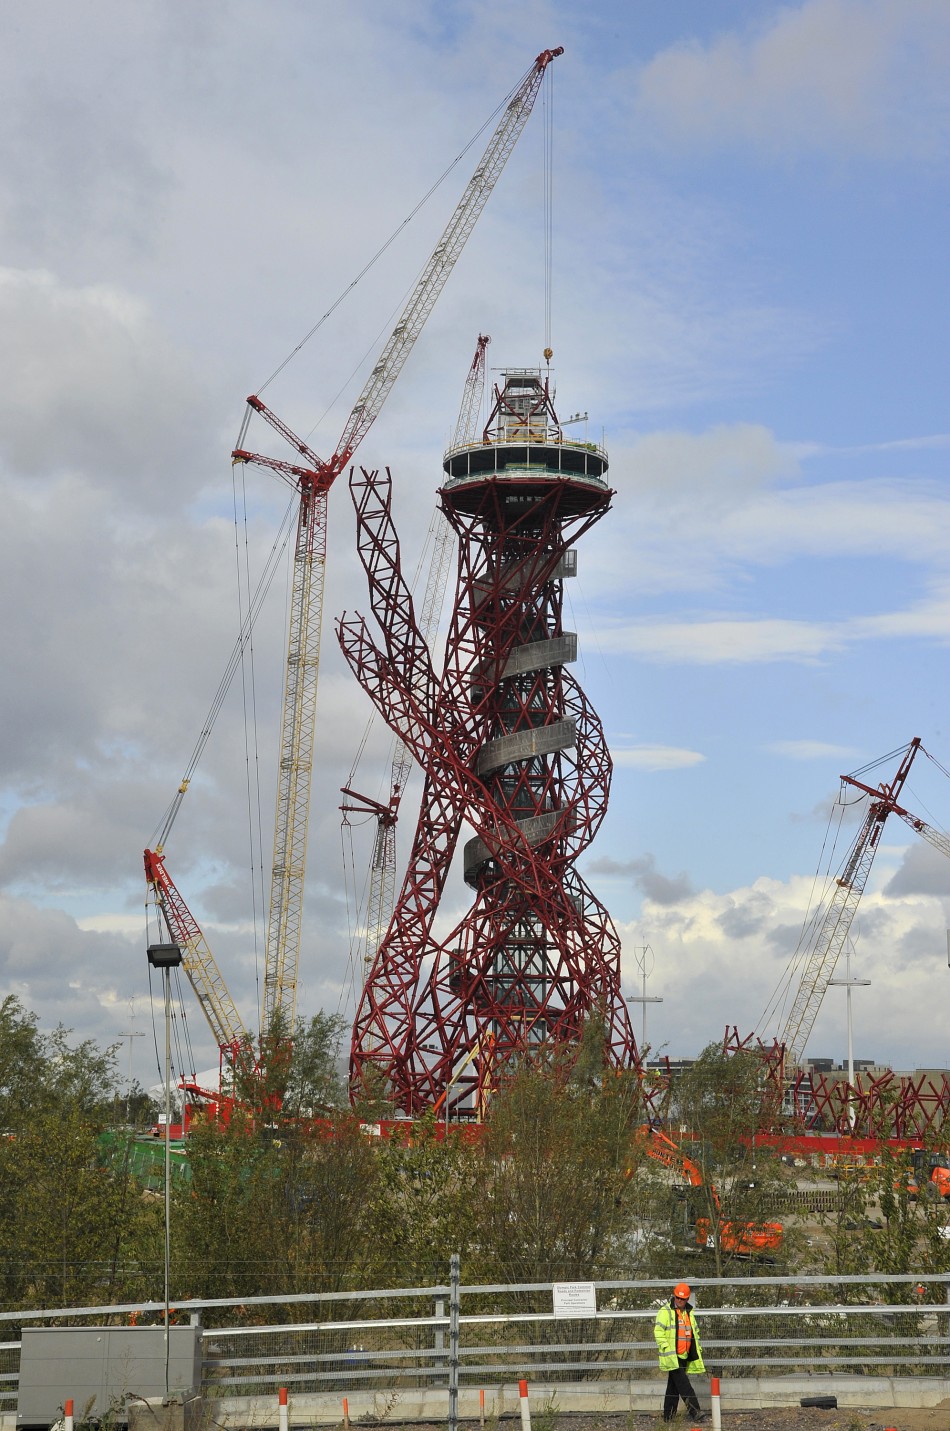 A construction worker passes near the Anish Kapoor-designed ArcelorMittal Orbit tower at the Olympic site at Stratford in east London, on October 7, 2011. The tower will be Britains largest piece of public art and is intended to form part of the legacy o